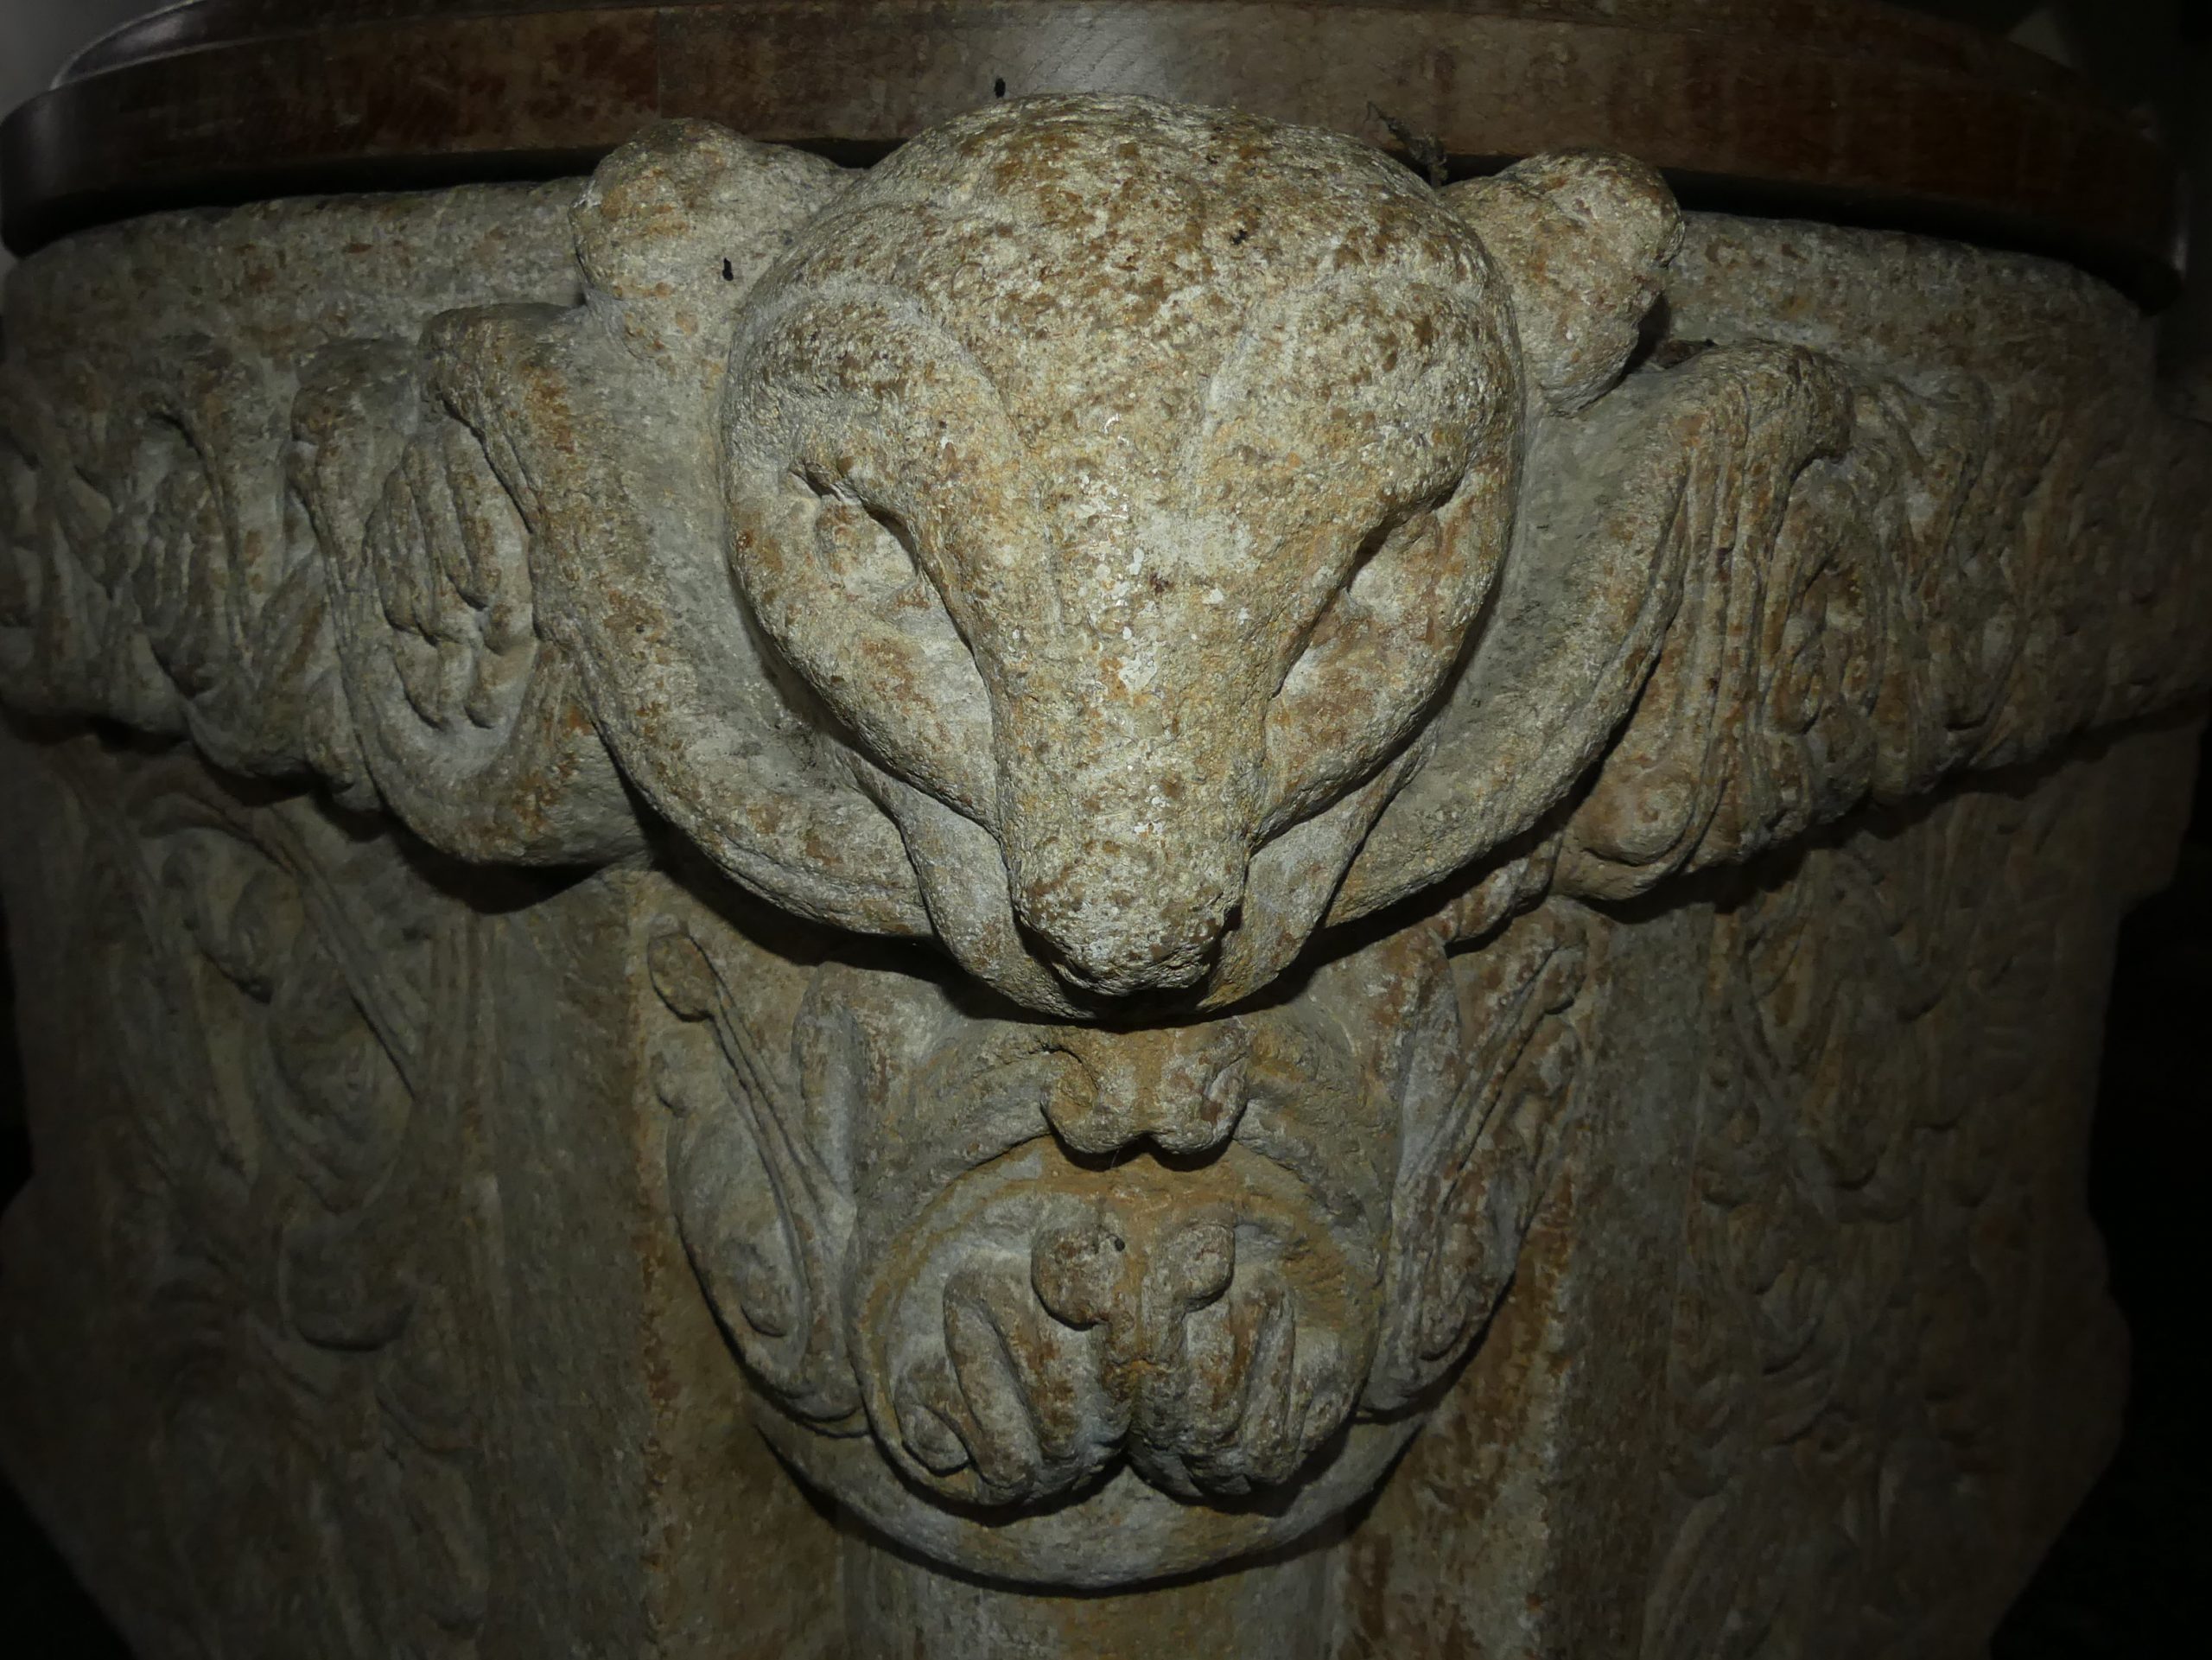 The corner of a square, Norman font carved with a stylised animals head looking directly at the camera